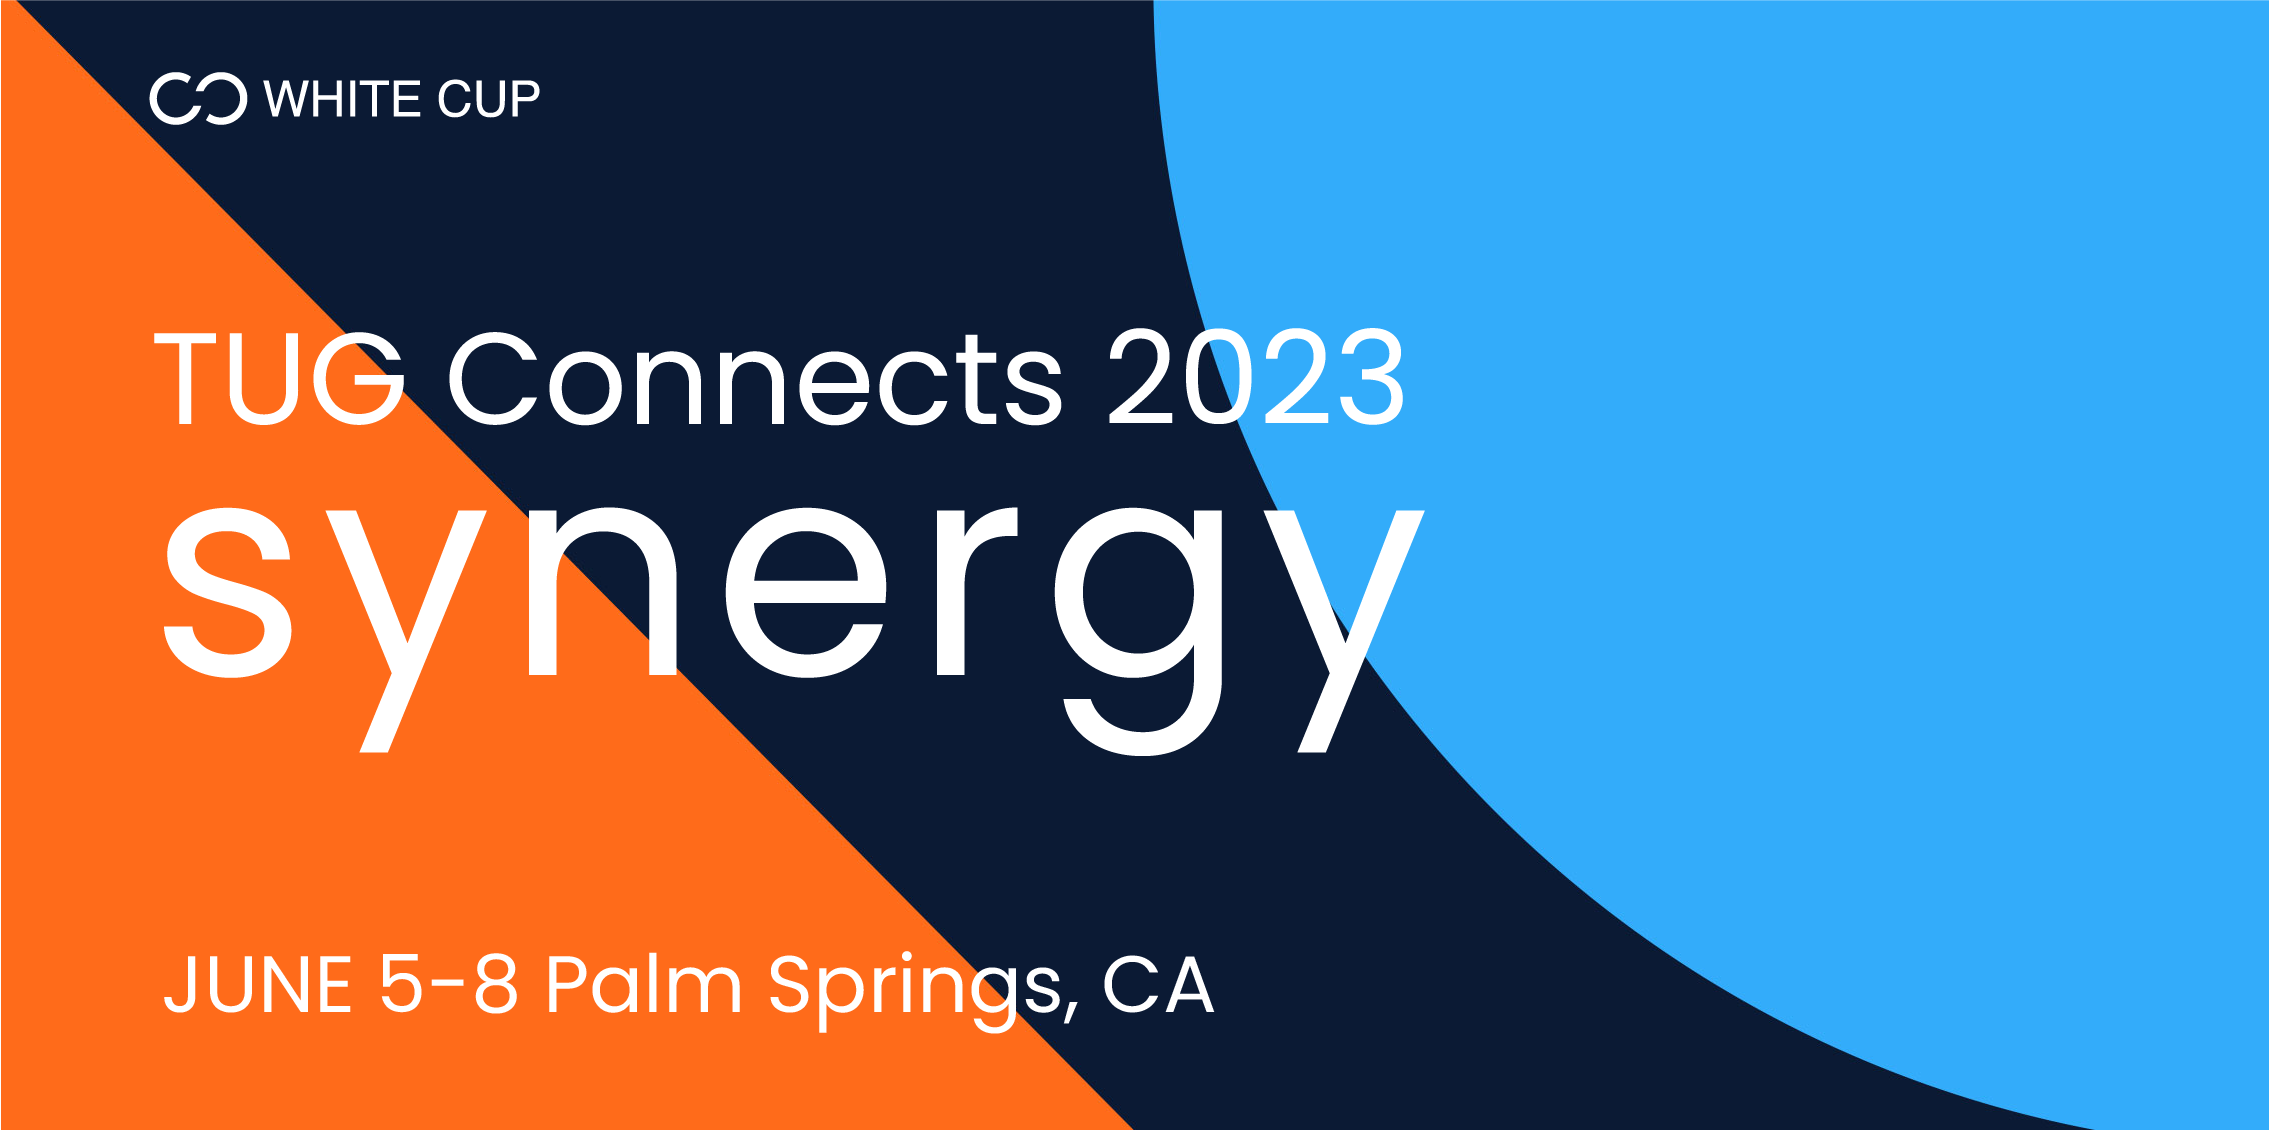 TUG connects 2023 Synergy in Palm Springs, CA